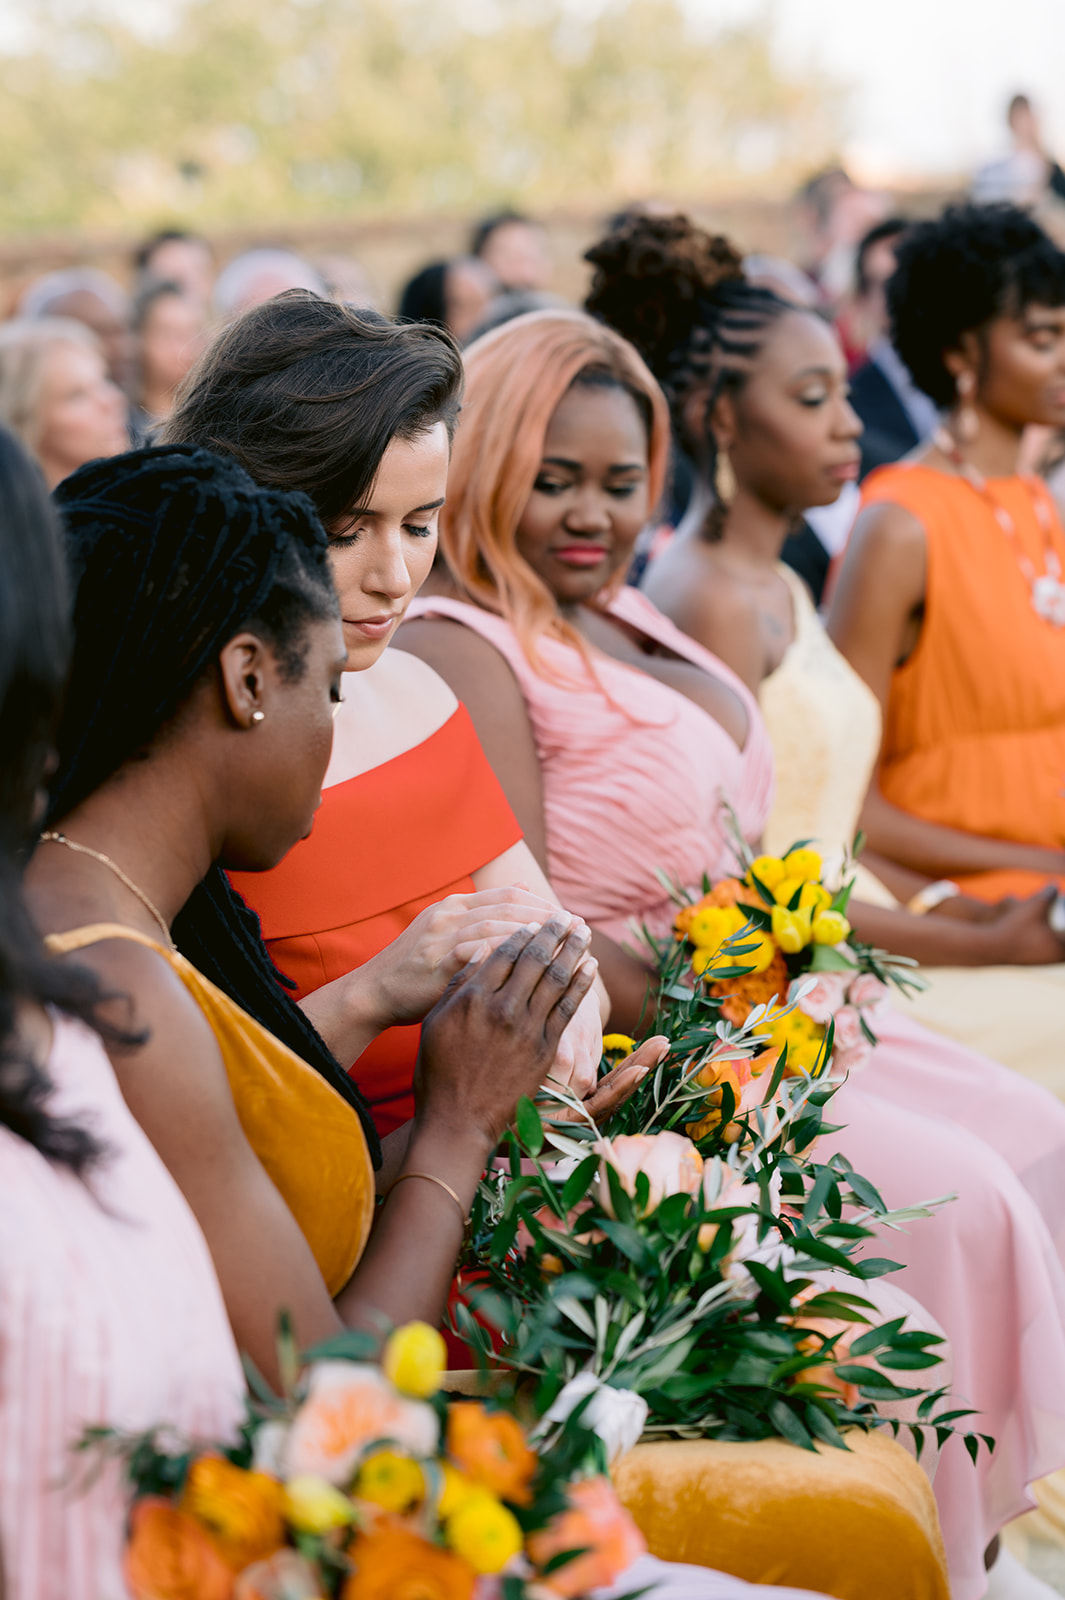 Sunset-hued bridesmaids participating in a ring-warming ceremony.